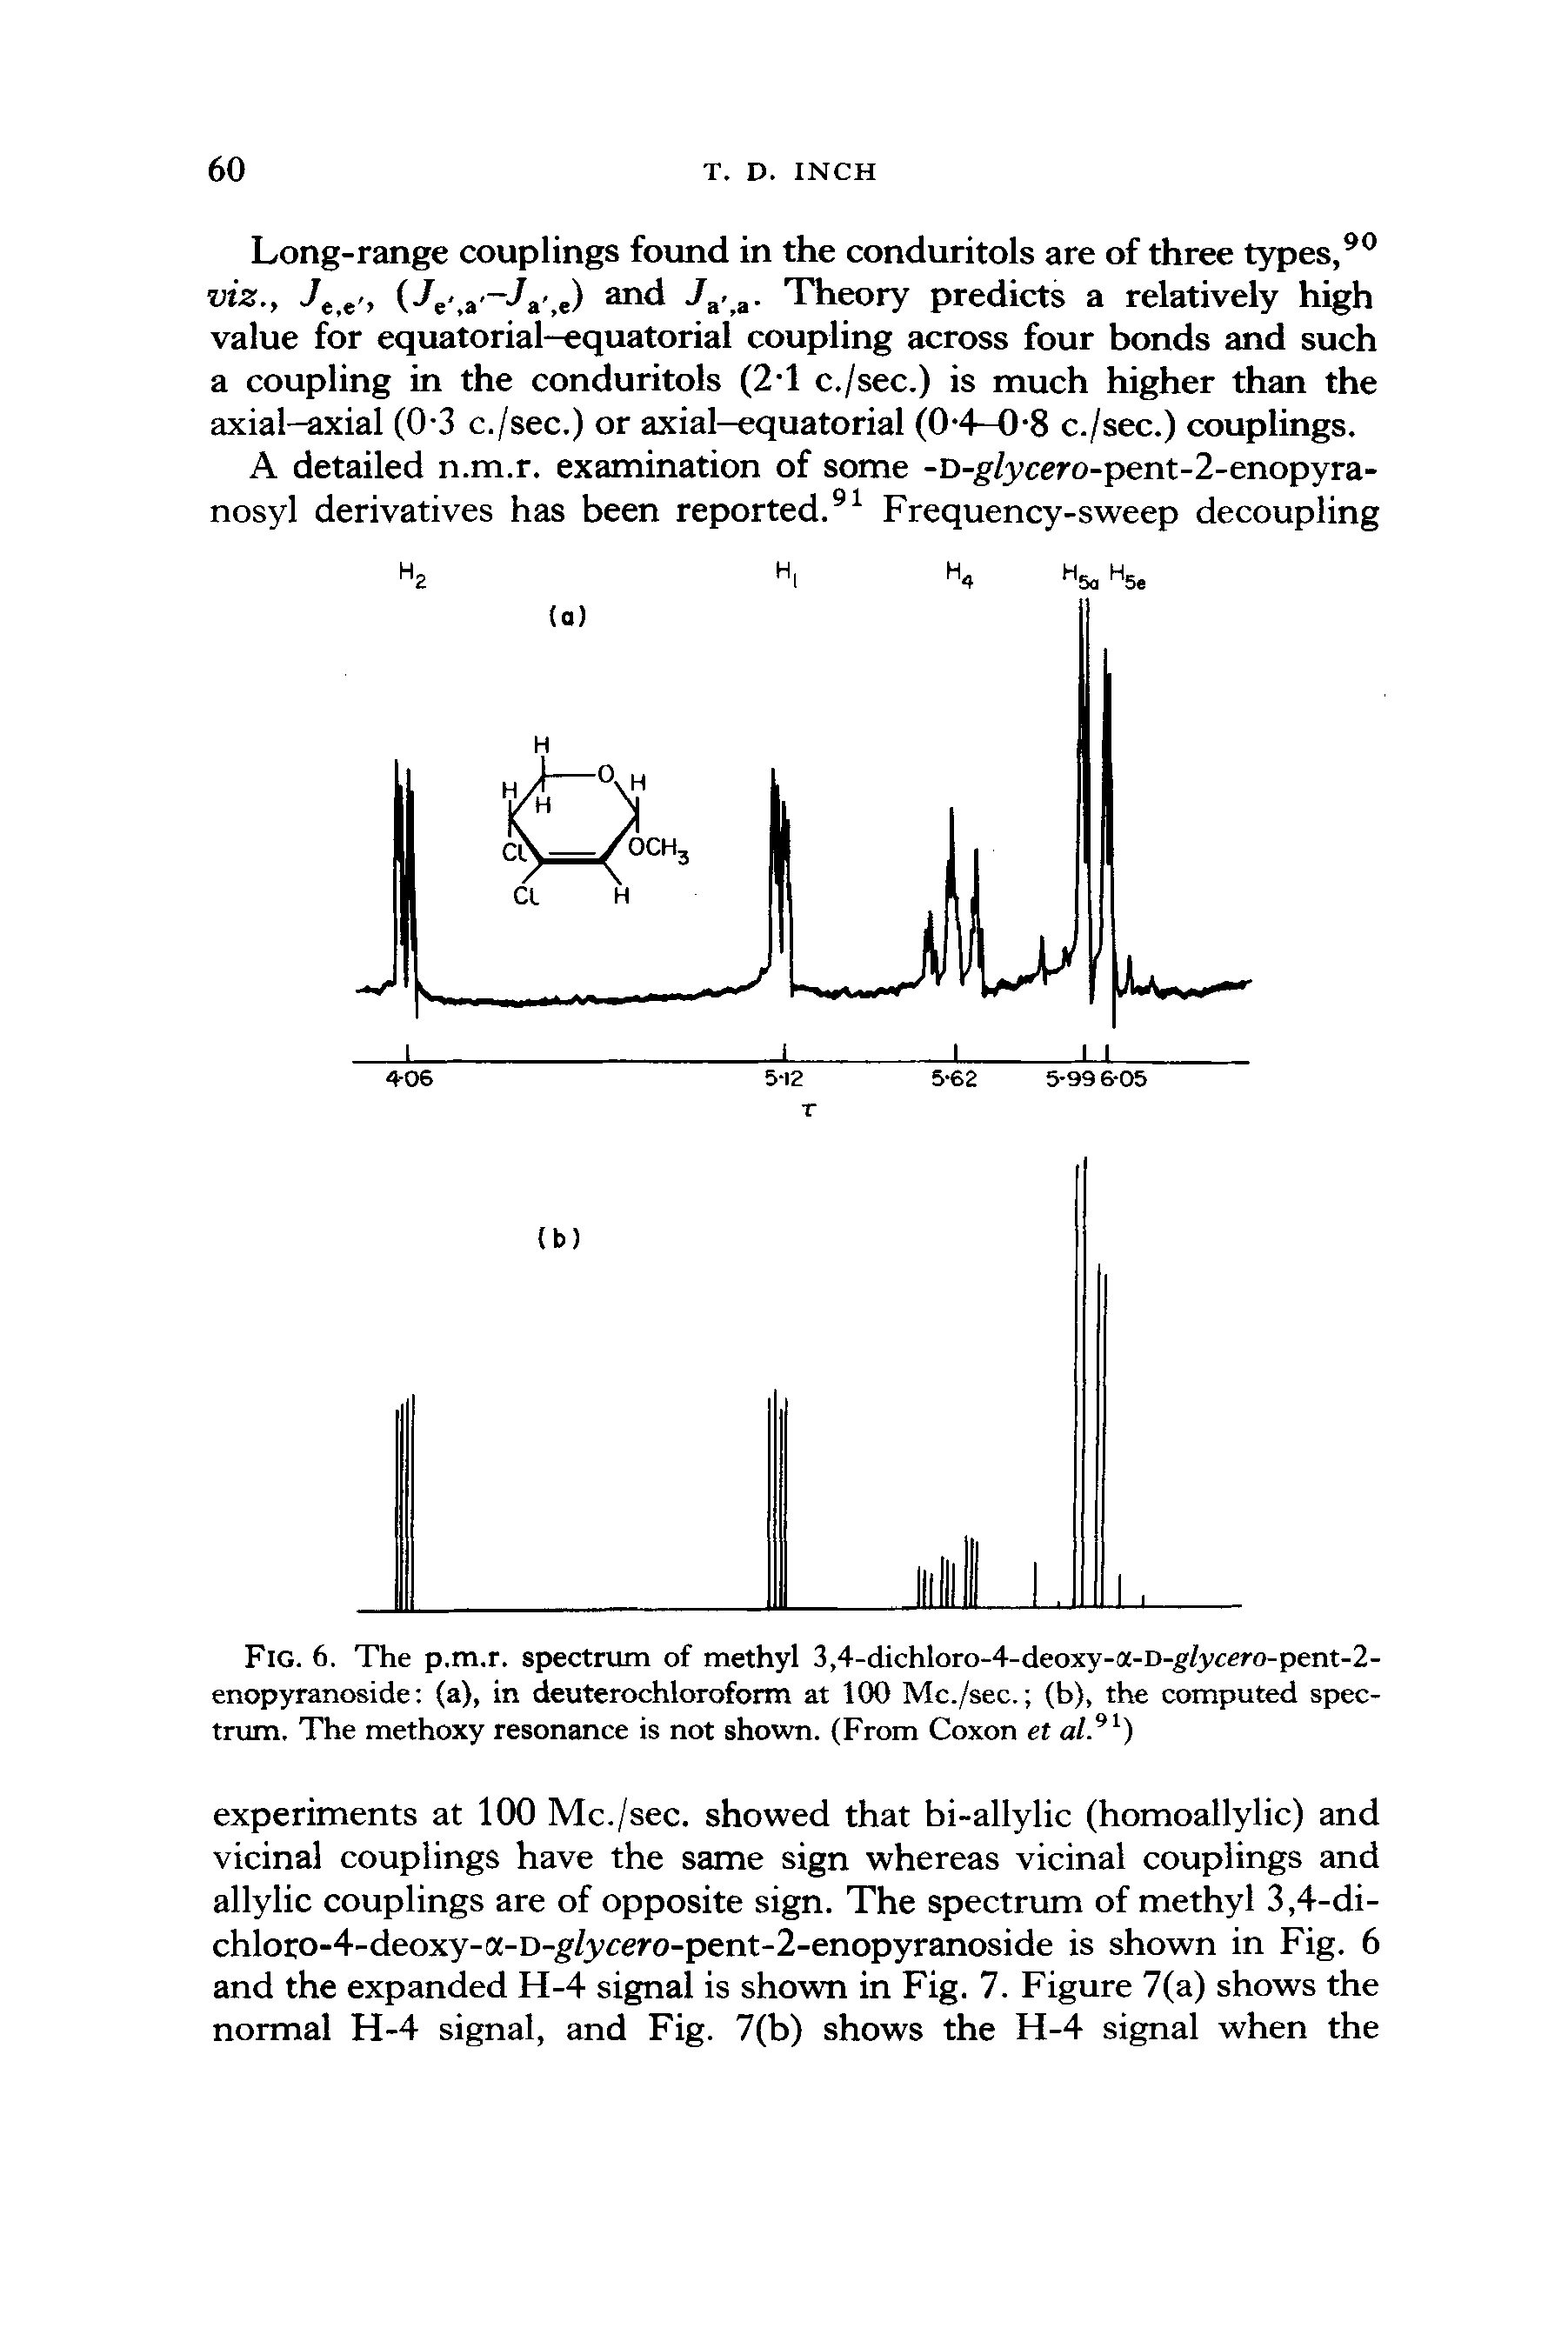 Fig. 6. The p.m.r. spectrum of methyl 3,4-dichloro-4-deoxy-a-D-g/ycero-pent-2-enopyranoside (a), in deuterochloroform at 100 Mc./sec. (b), the computed spectrum. The methoxy resonance is not shown. (From Coxon et...